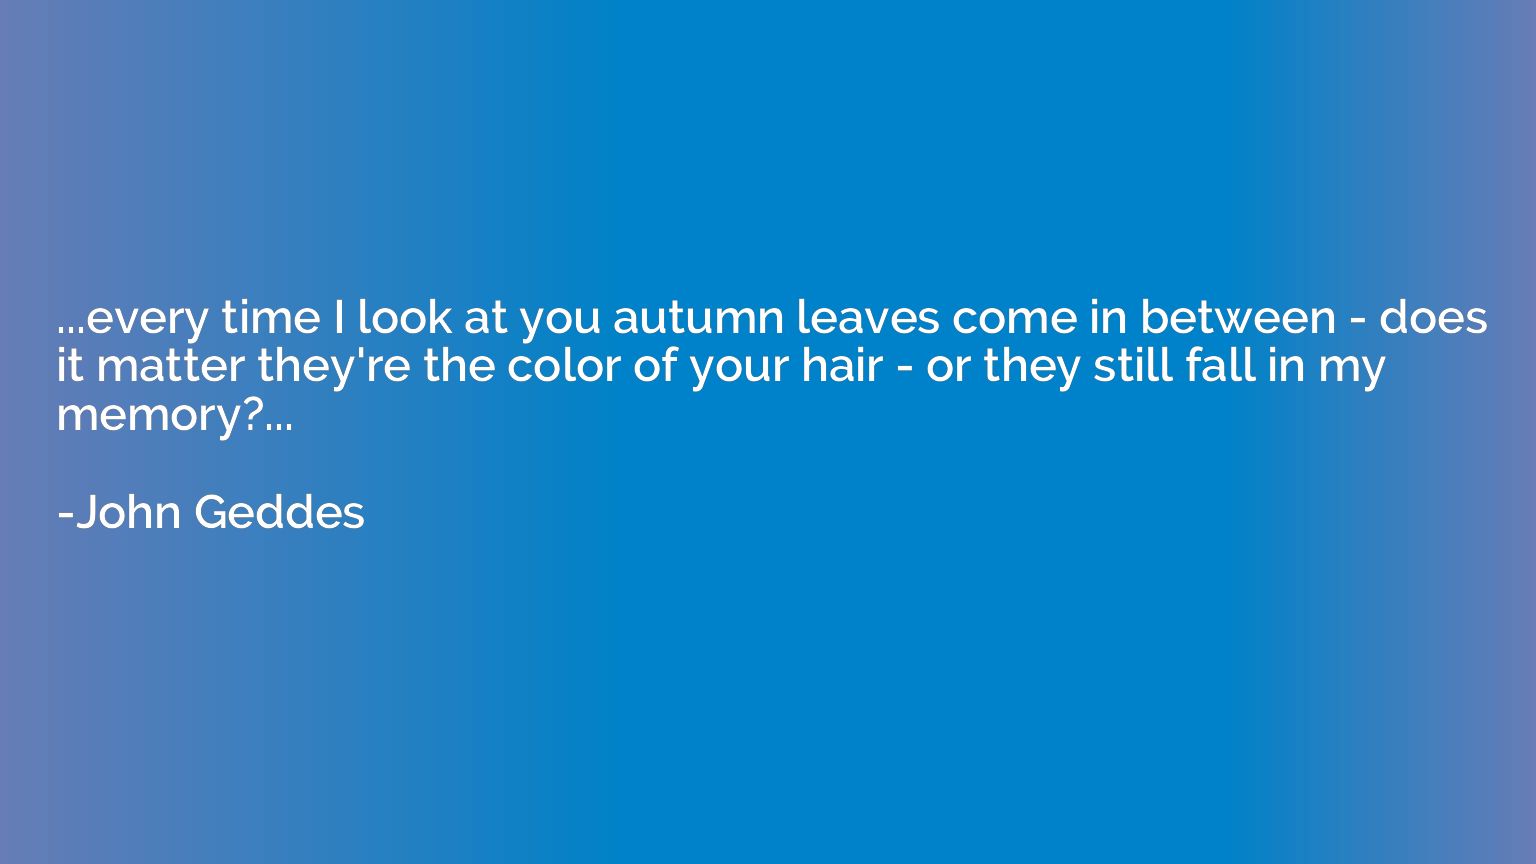 ...every time I look at you autumn leaves come in between - 